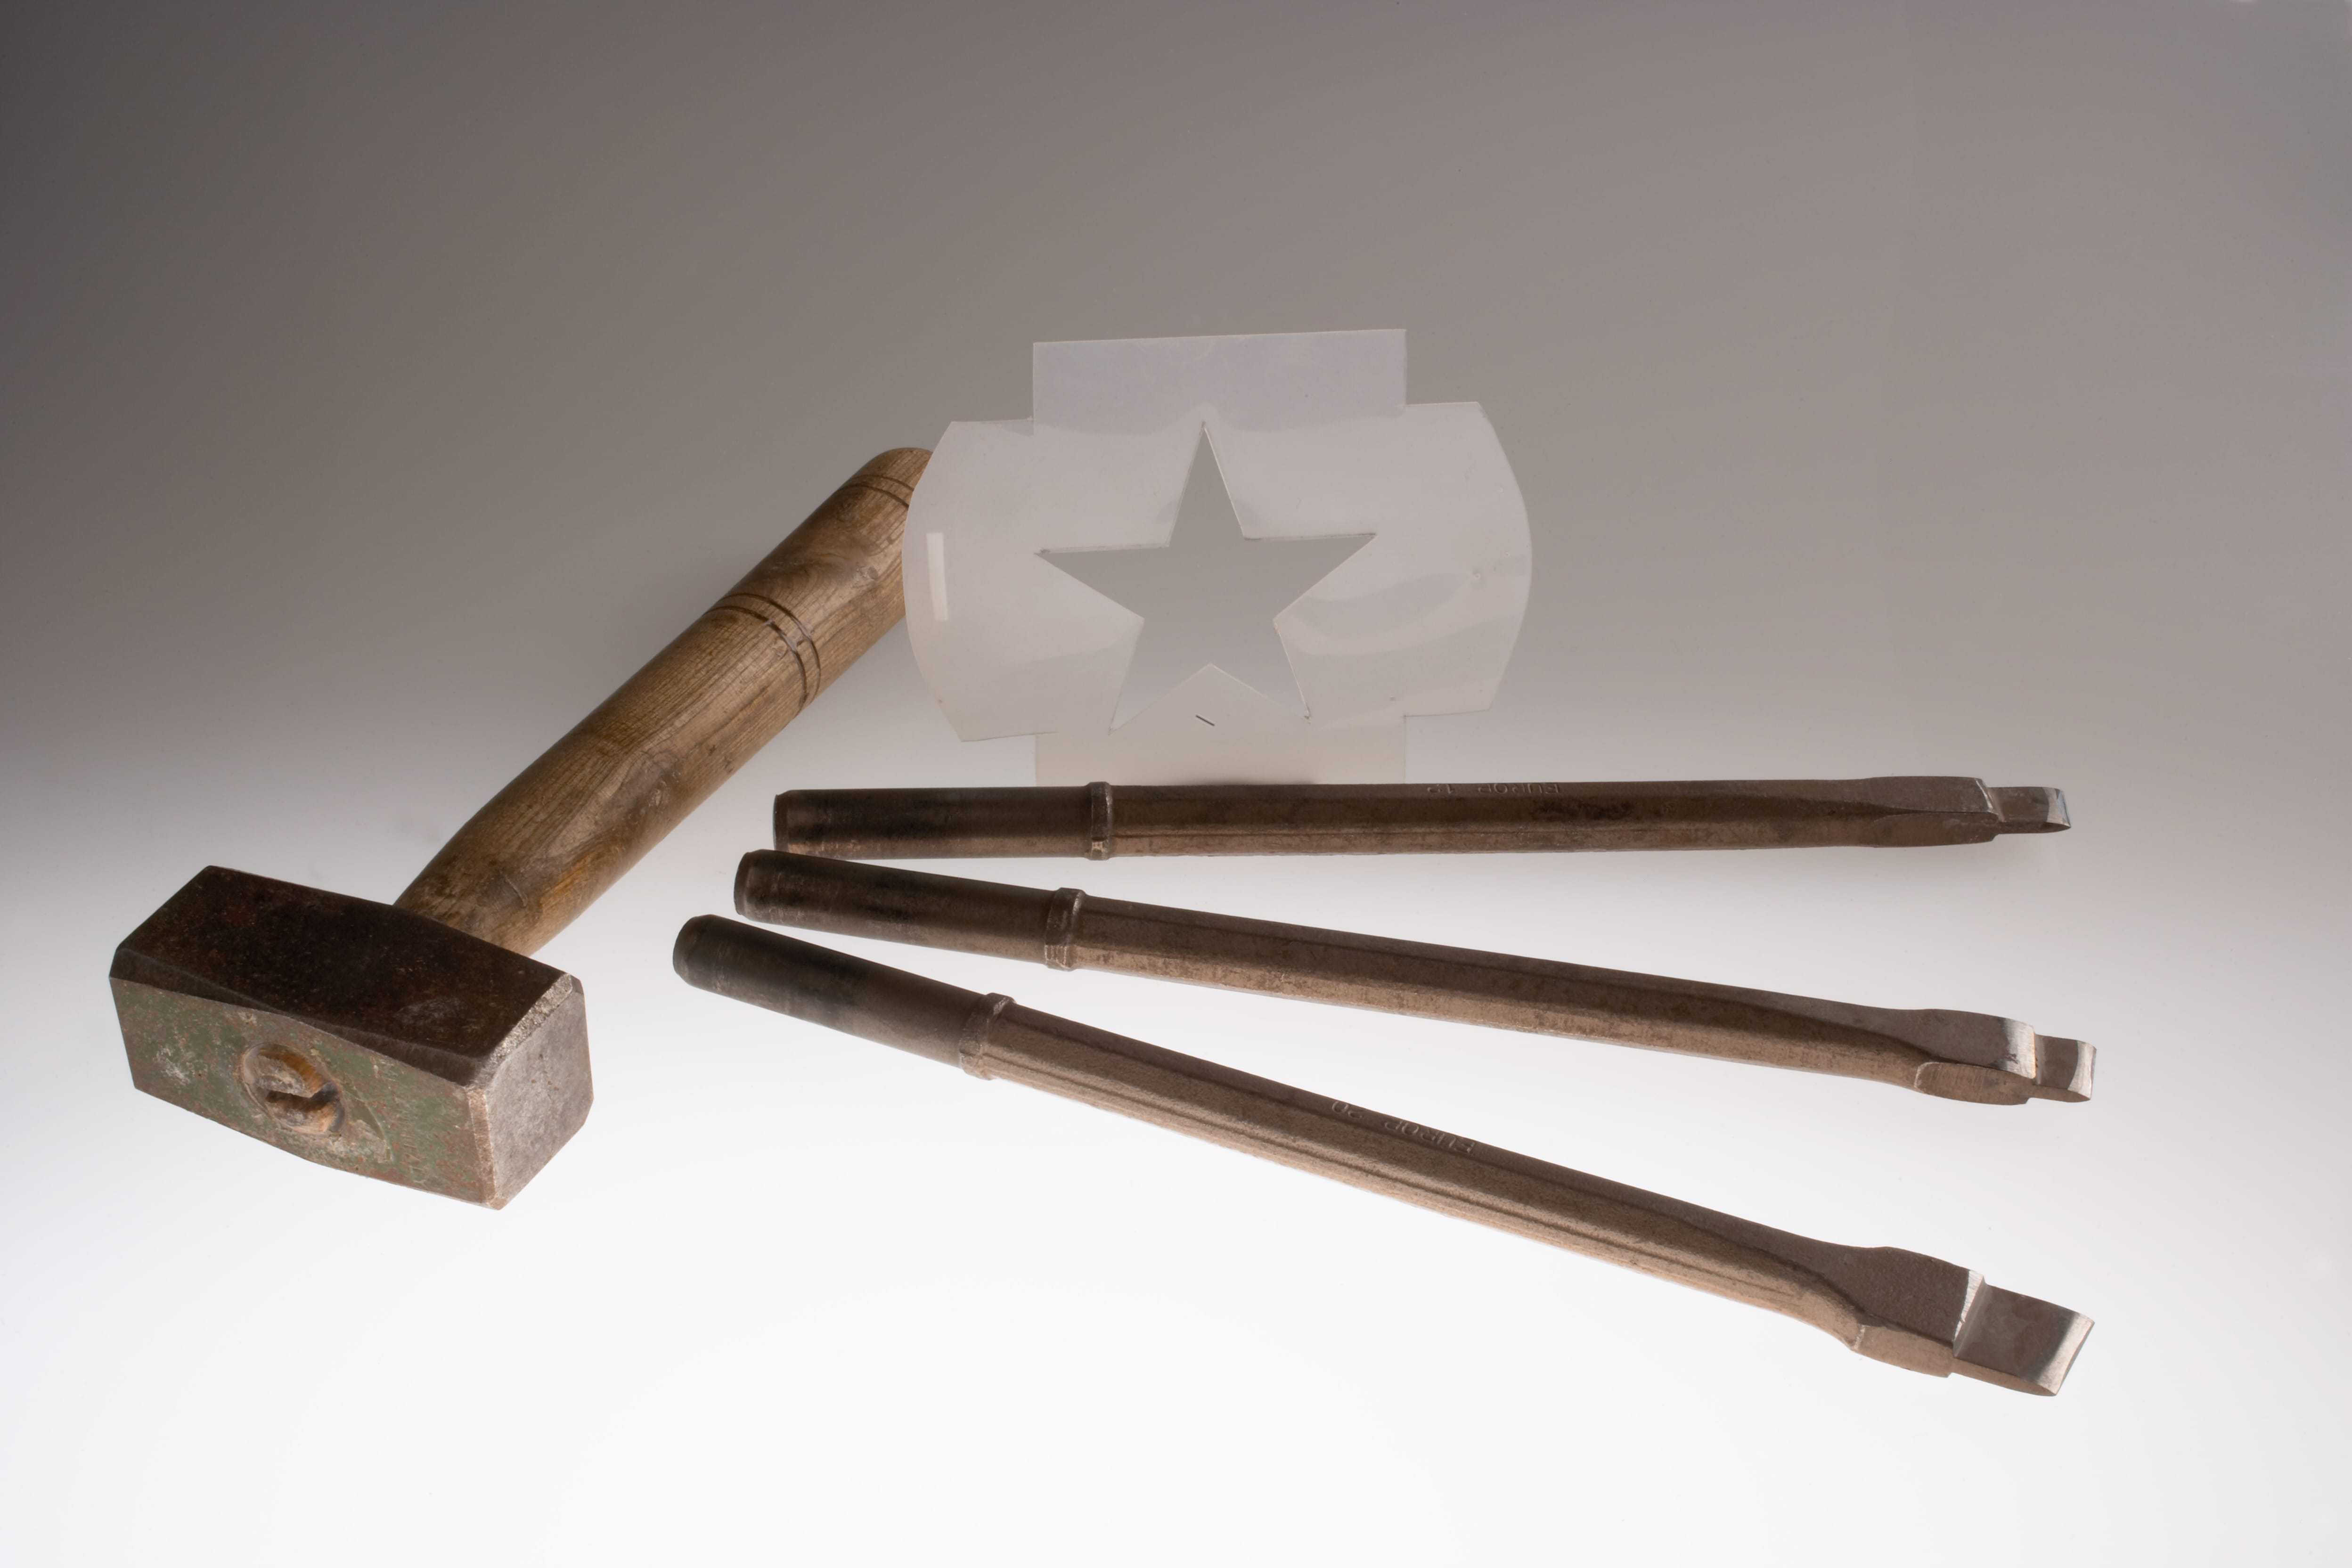 A brown hammer and silver chisels alongside a clear white star template